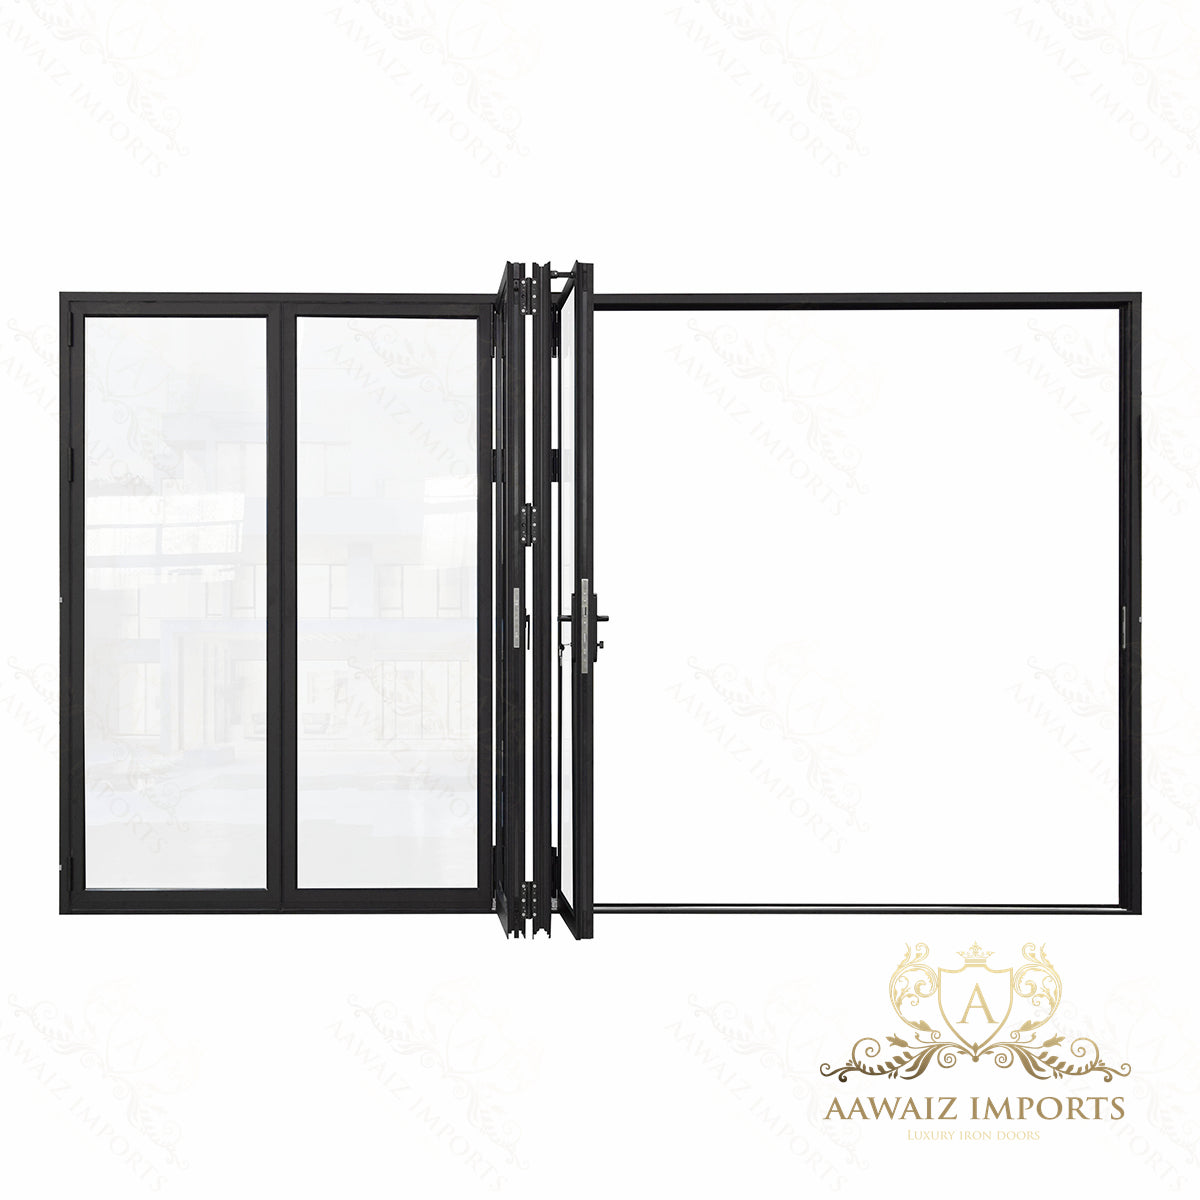 12 Ft Wide By 9 Ft Tall (144" By 108") Aluminum Bi Fold Patio Door  Outswing  Thermal Break Insulated Matt Black Finish